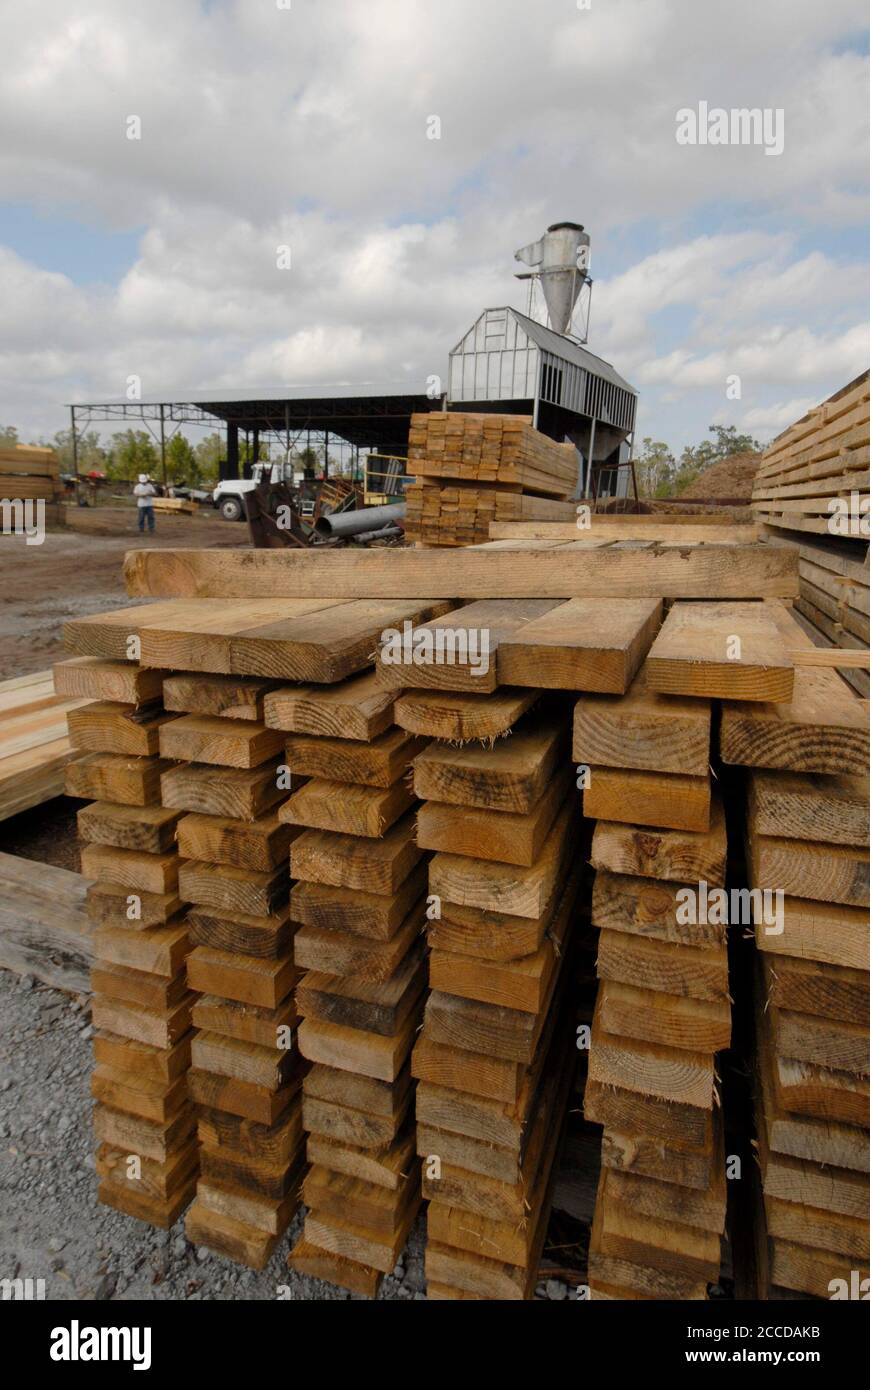 Orange, TX USA, November 10, 2006: Finished lumber at Rogers Lumber Company. The company processes pine lumber into rough-cut boards for the commercial construction industry. ©Bob Daemmrich Stock Photo